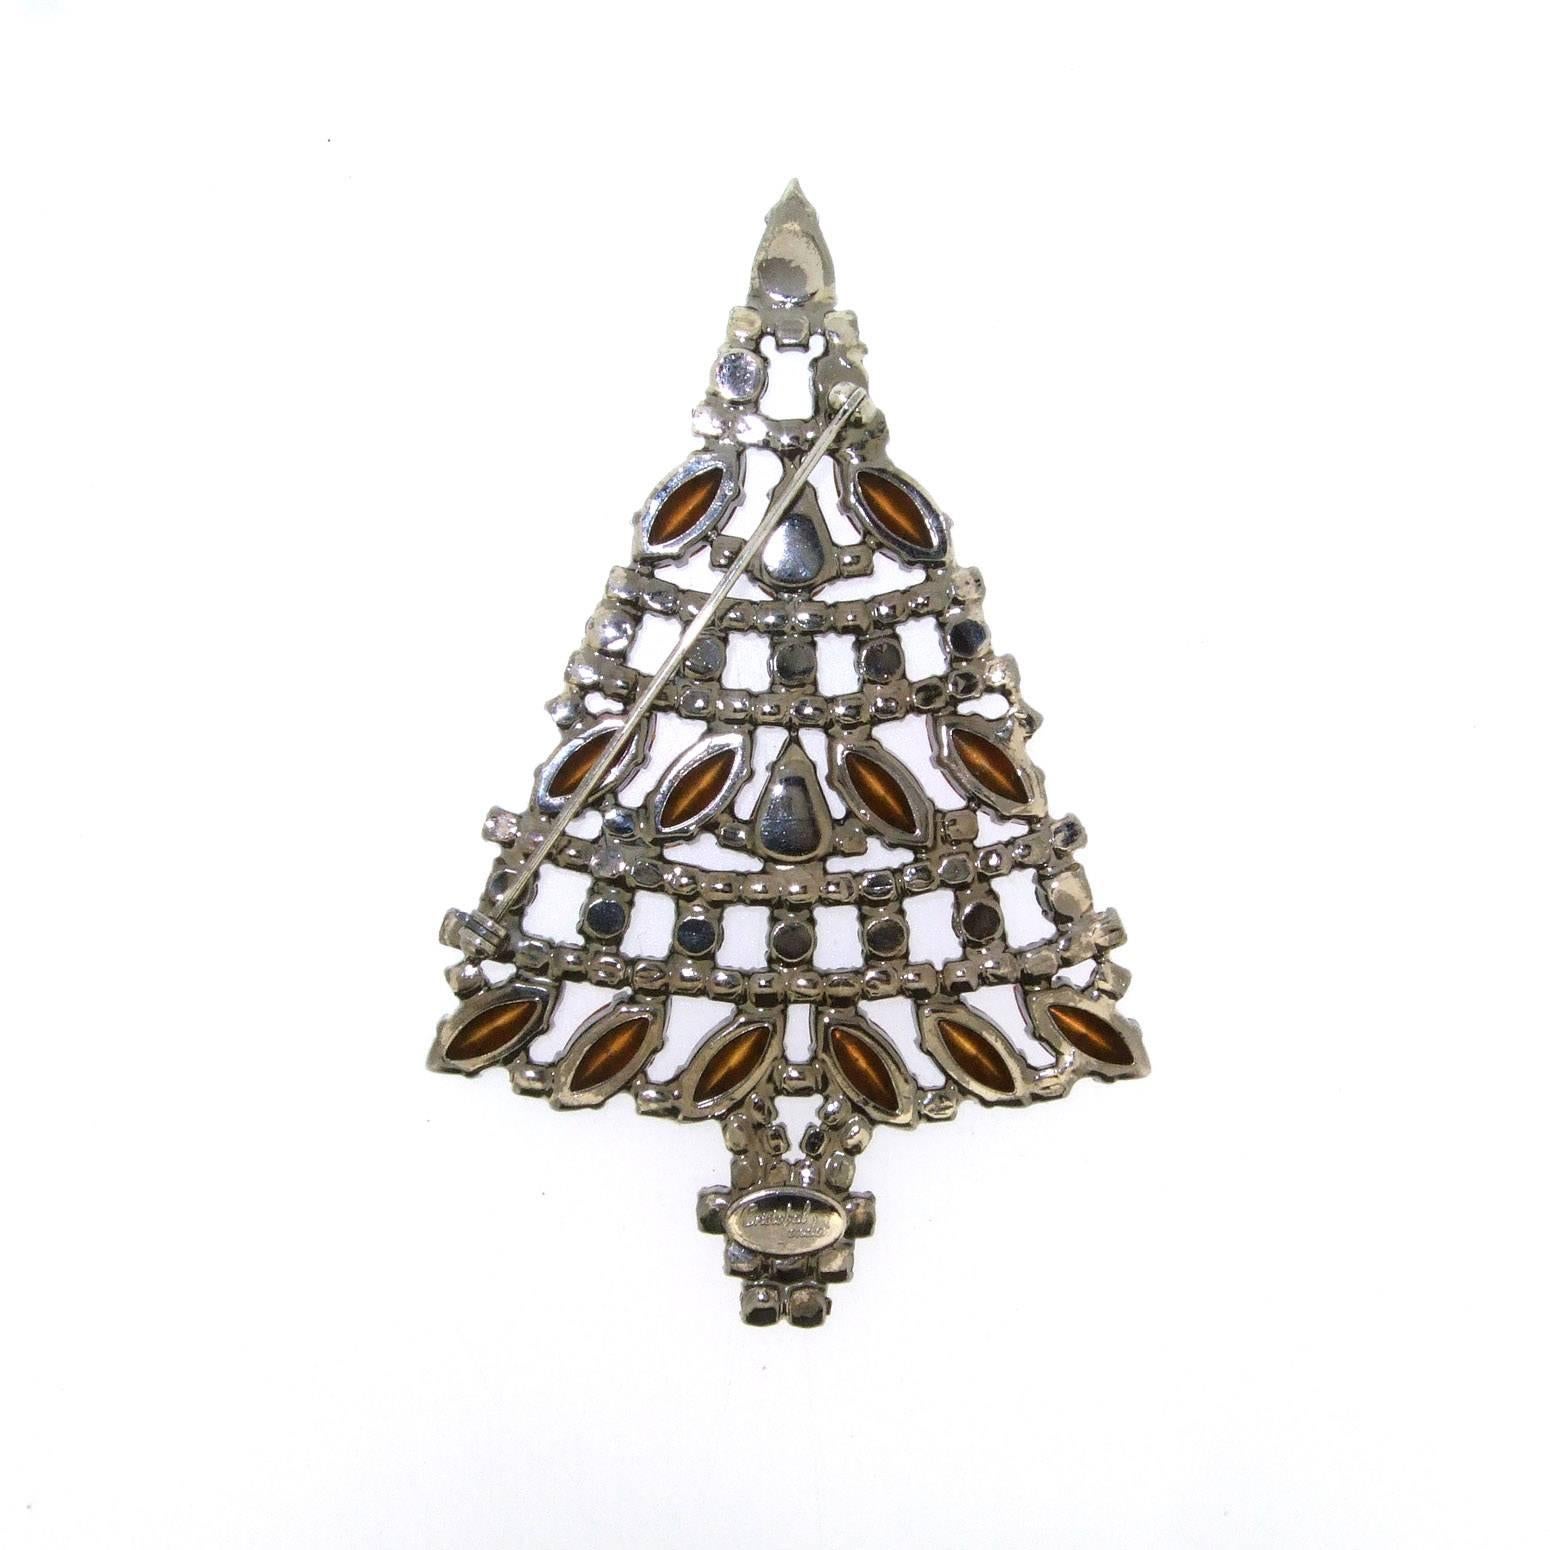 A large Christmas Tree brooch by Cristobal London, in antiqued silver tone metal set with pink, green and red crystals.

It measures 10cm high by 6.5cm wide, 0.5cm deep.